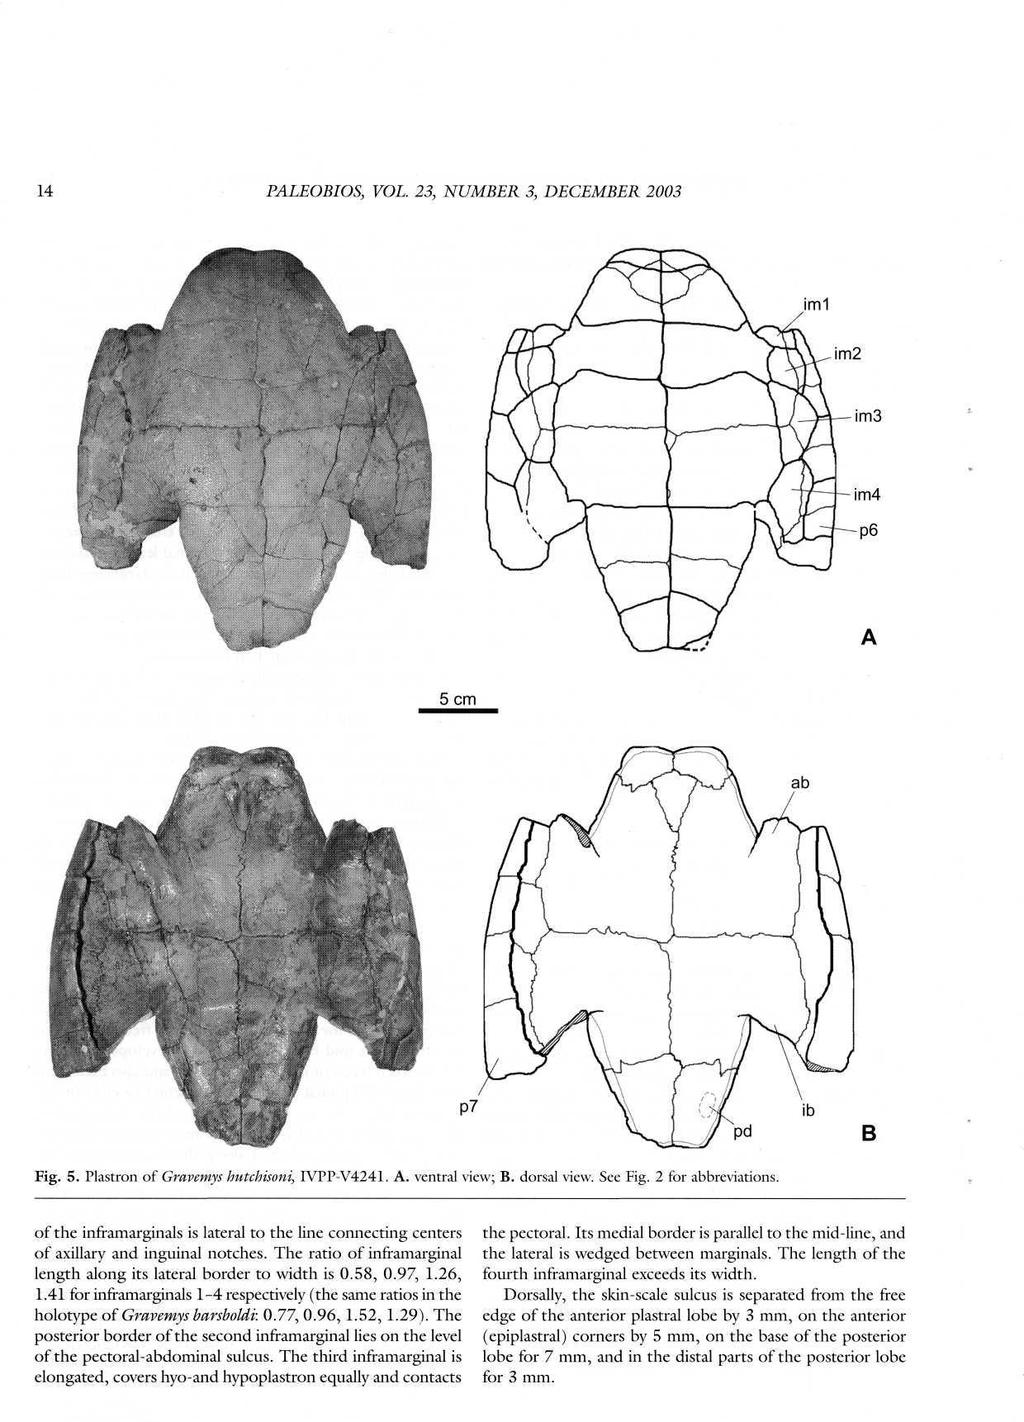 14 PALEOBIOS, VOL. 23, NUMBER 3, DECEMBER 2003 im2 штш jm3 5 cm ab ill w Fig. 5. Plastron of Gravemys hutchisoni, IVPPV4241. A. ventral view; B. dorsal view. See Fig. 2 for abbreviations.